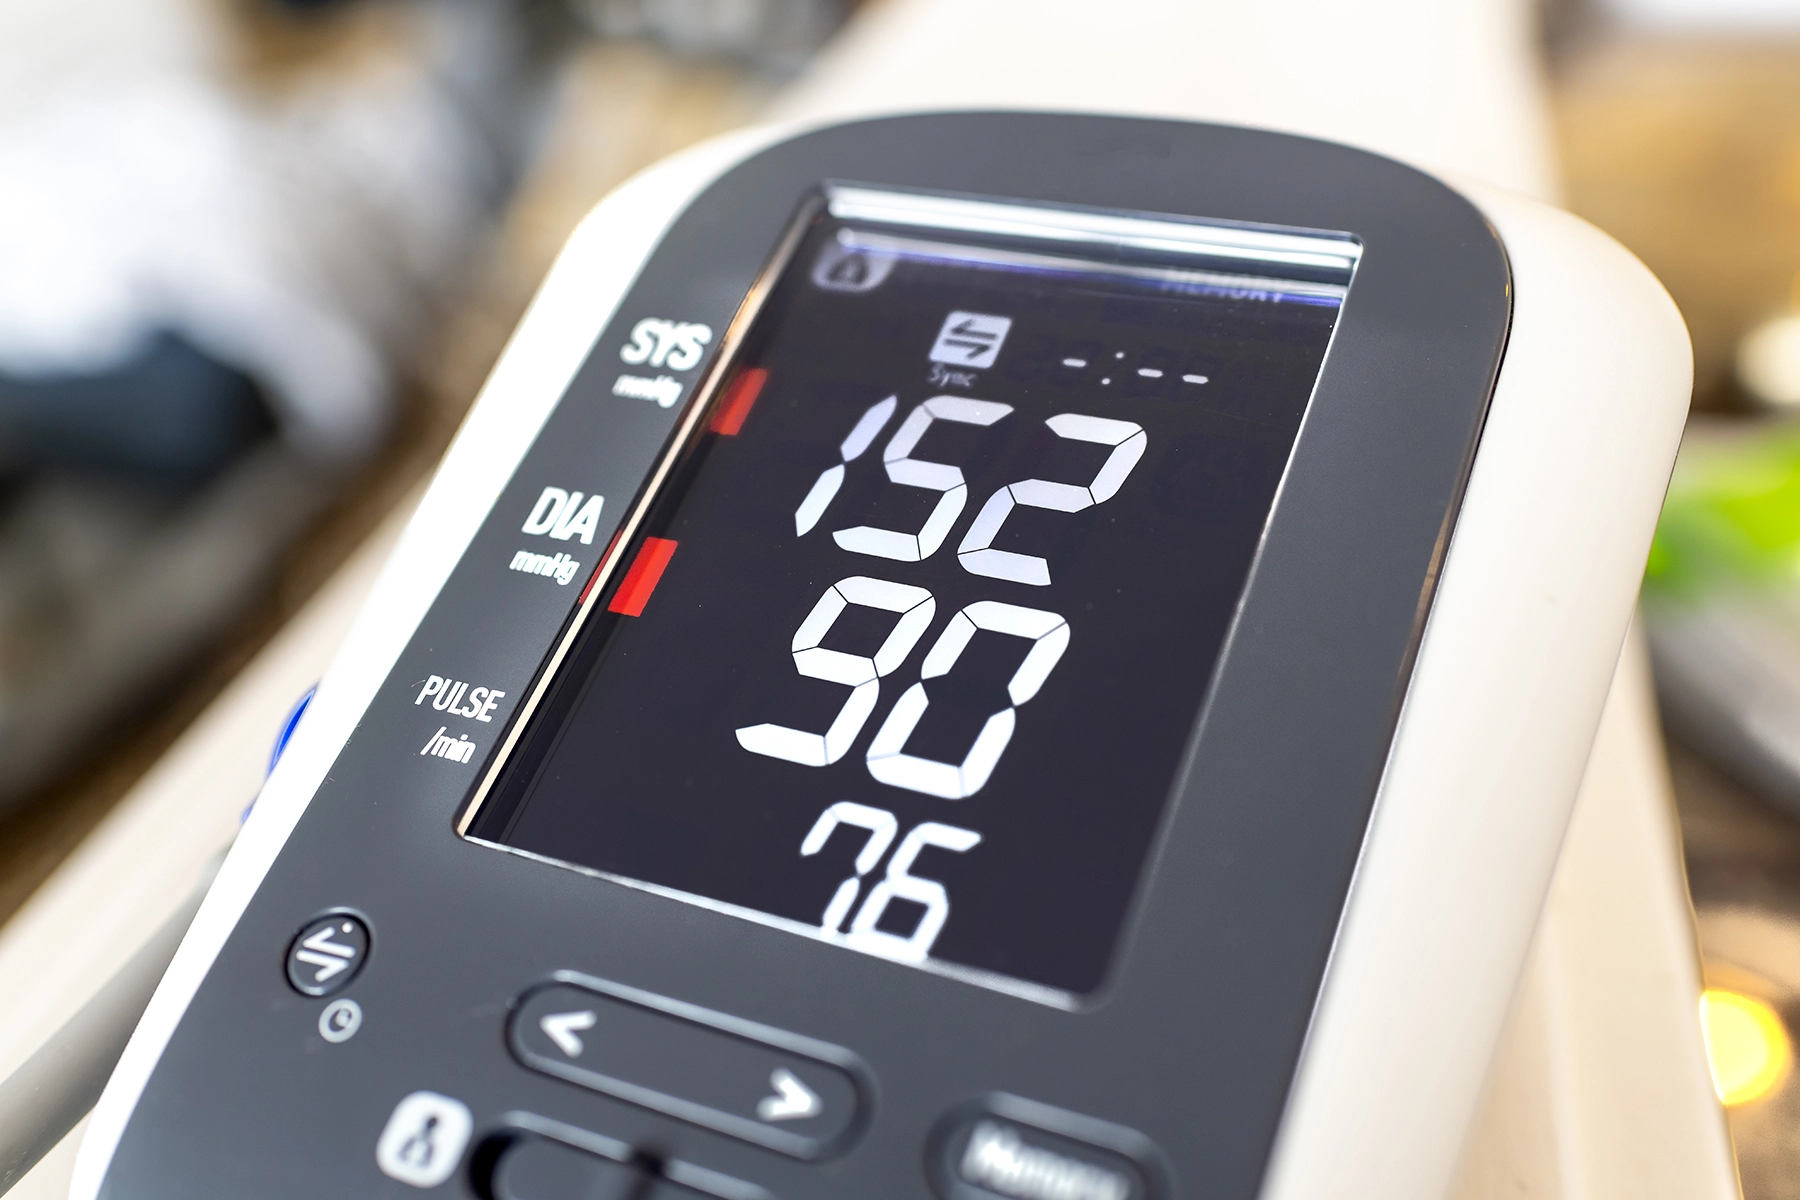 Close-up image of an at-home blood pressure monitor